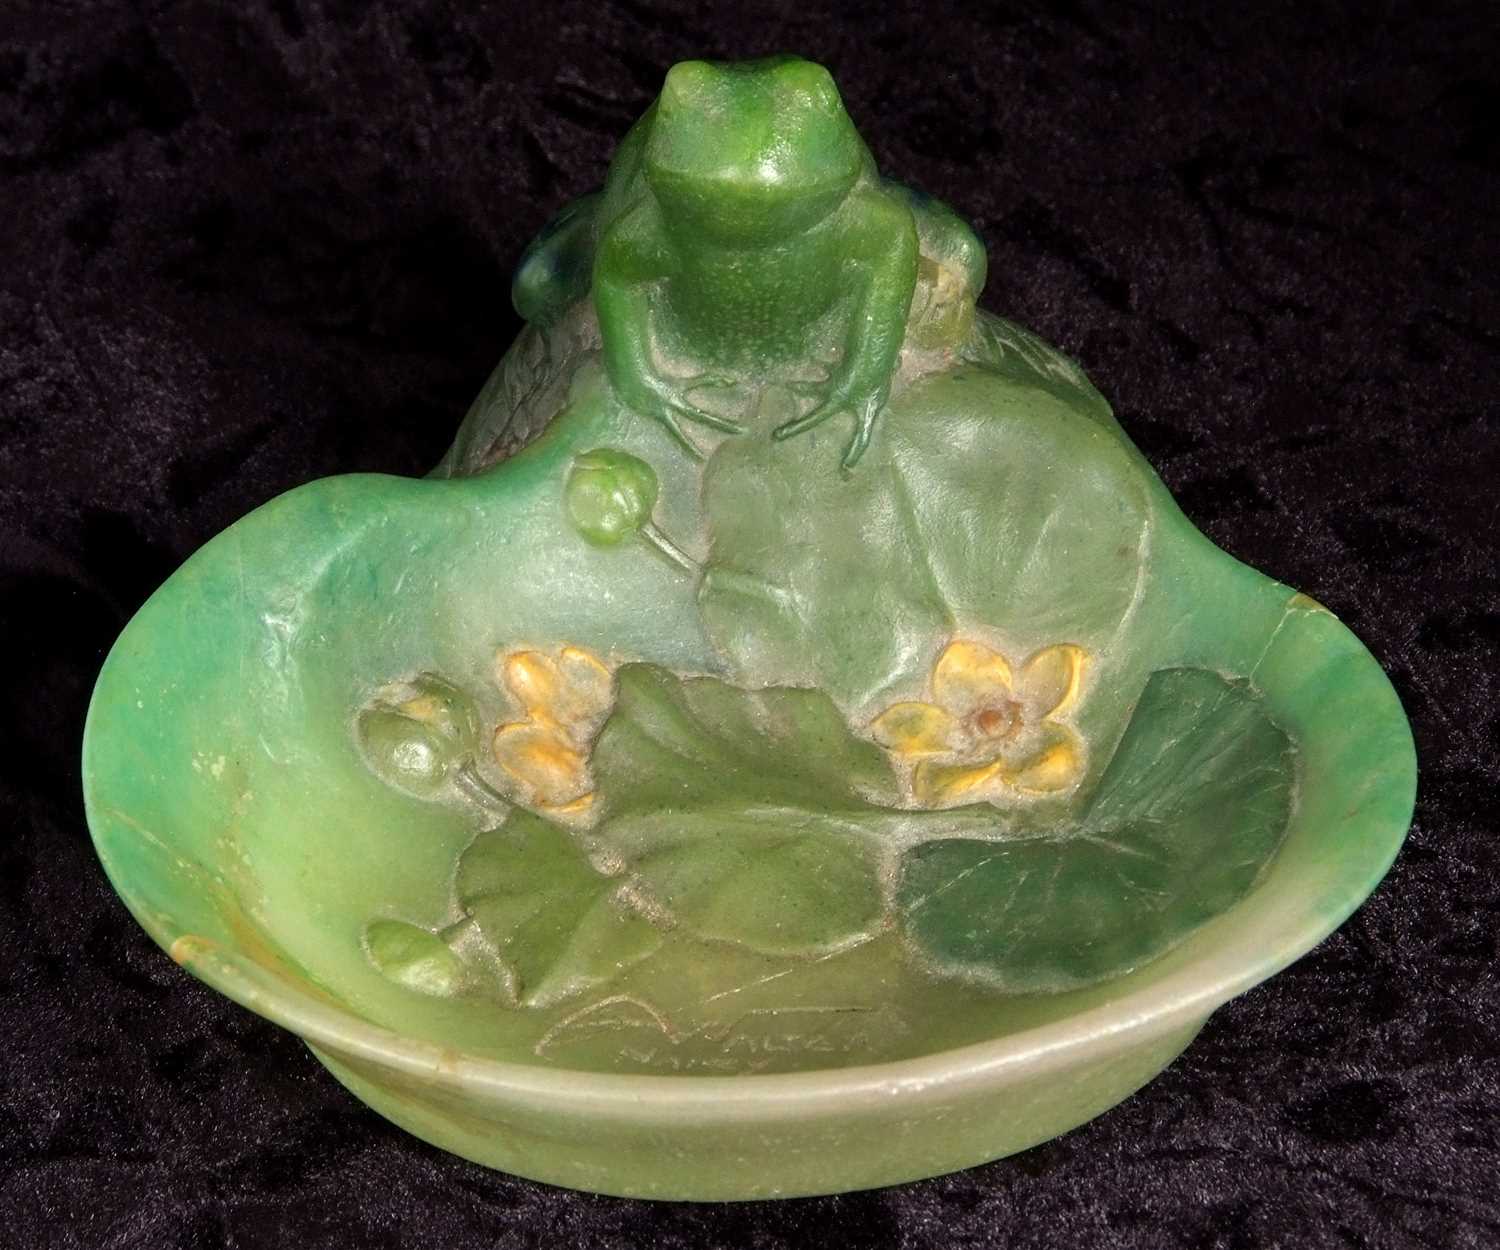 An Almeric Walter pate de verre dish c1920 designed by Henri Berge modelled as a green coloured frog - Image 5 of 11